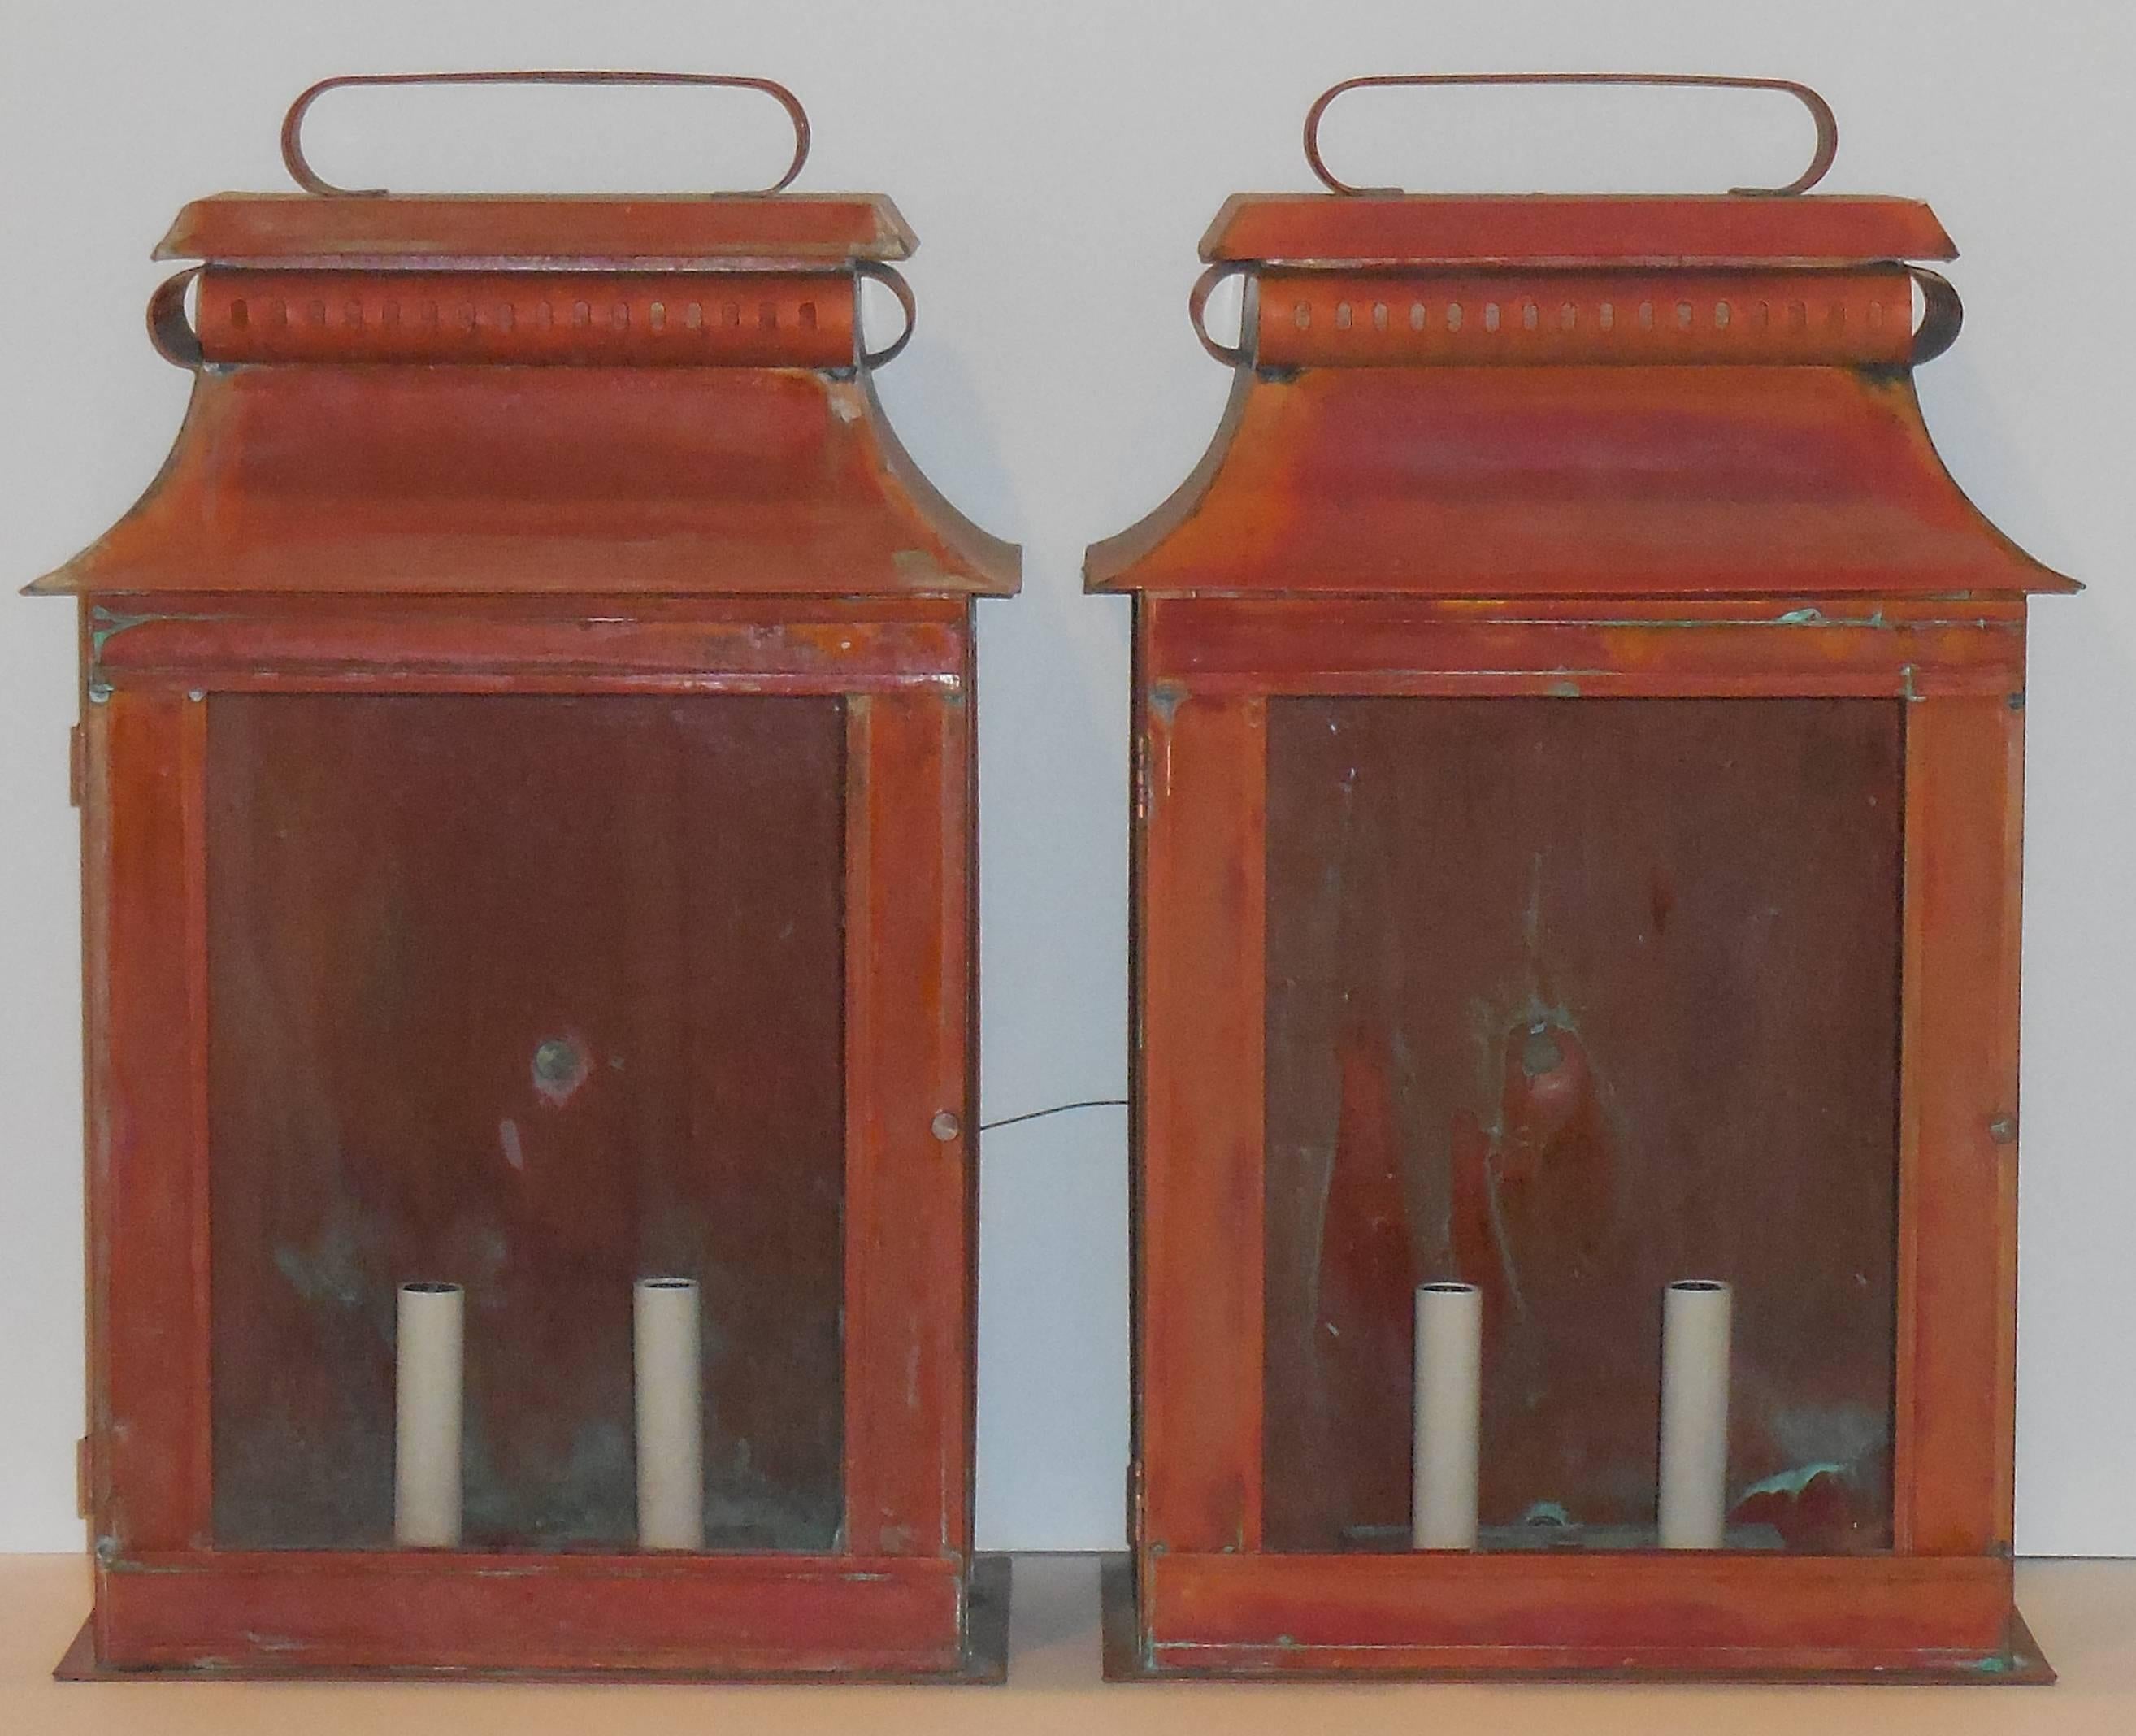 20th Century Pair of Large Architectural Wall Copper Lantern